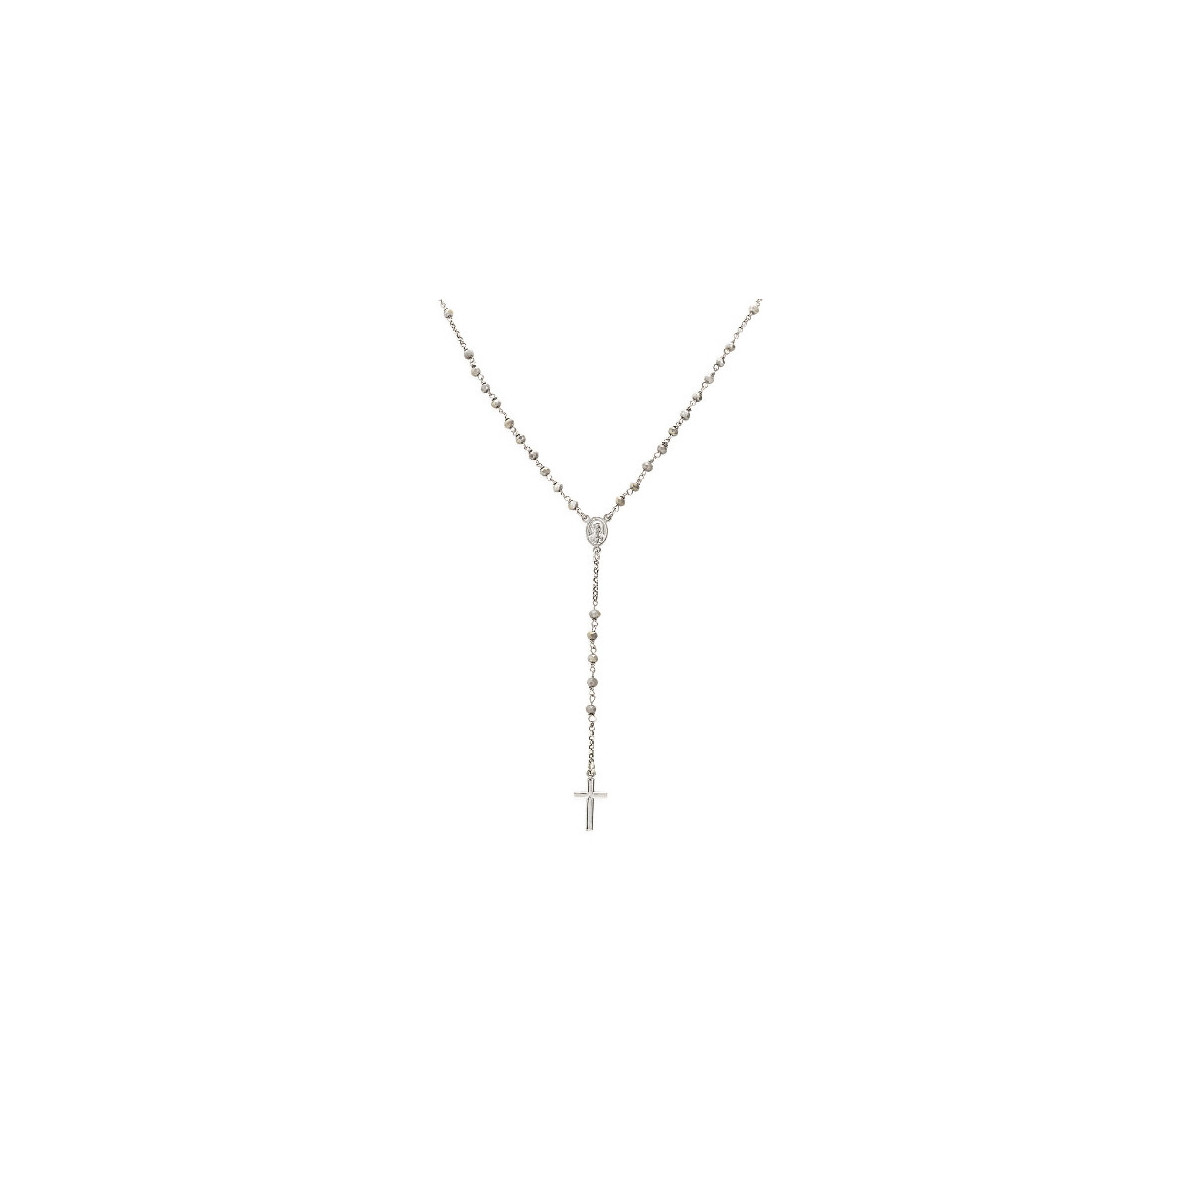 Necklace Rosario Classic rhodium plated with crystals